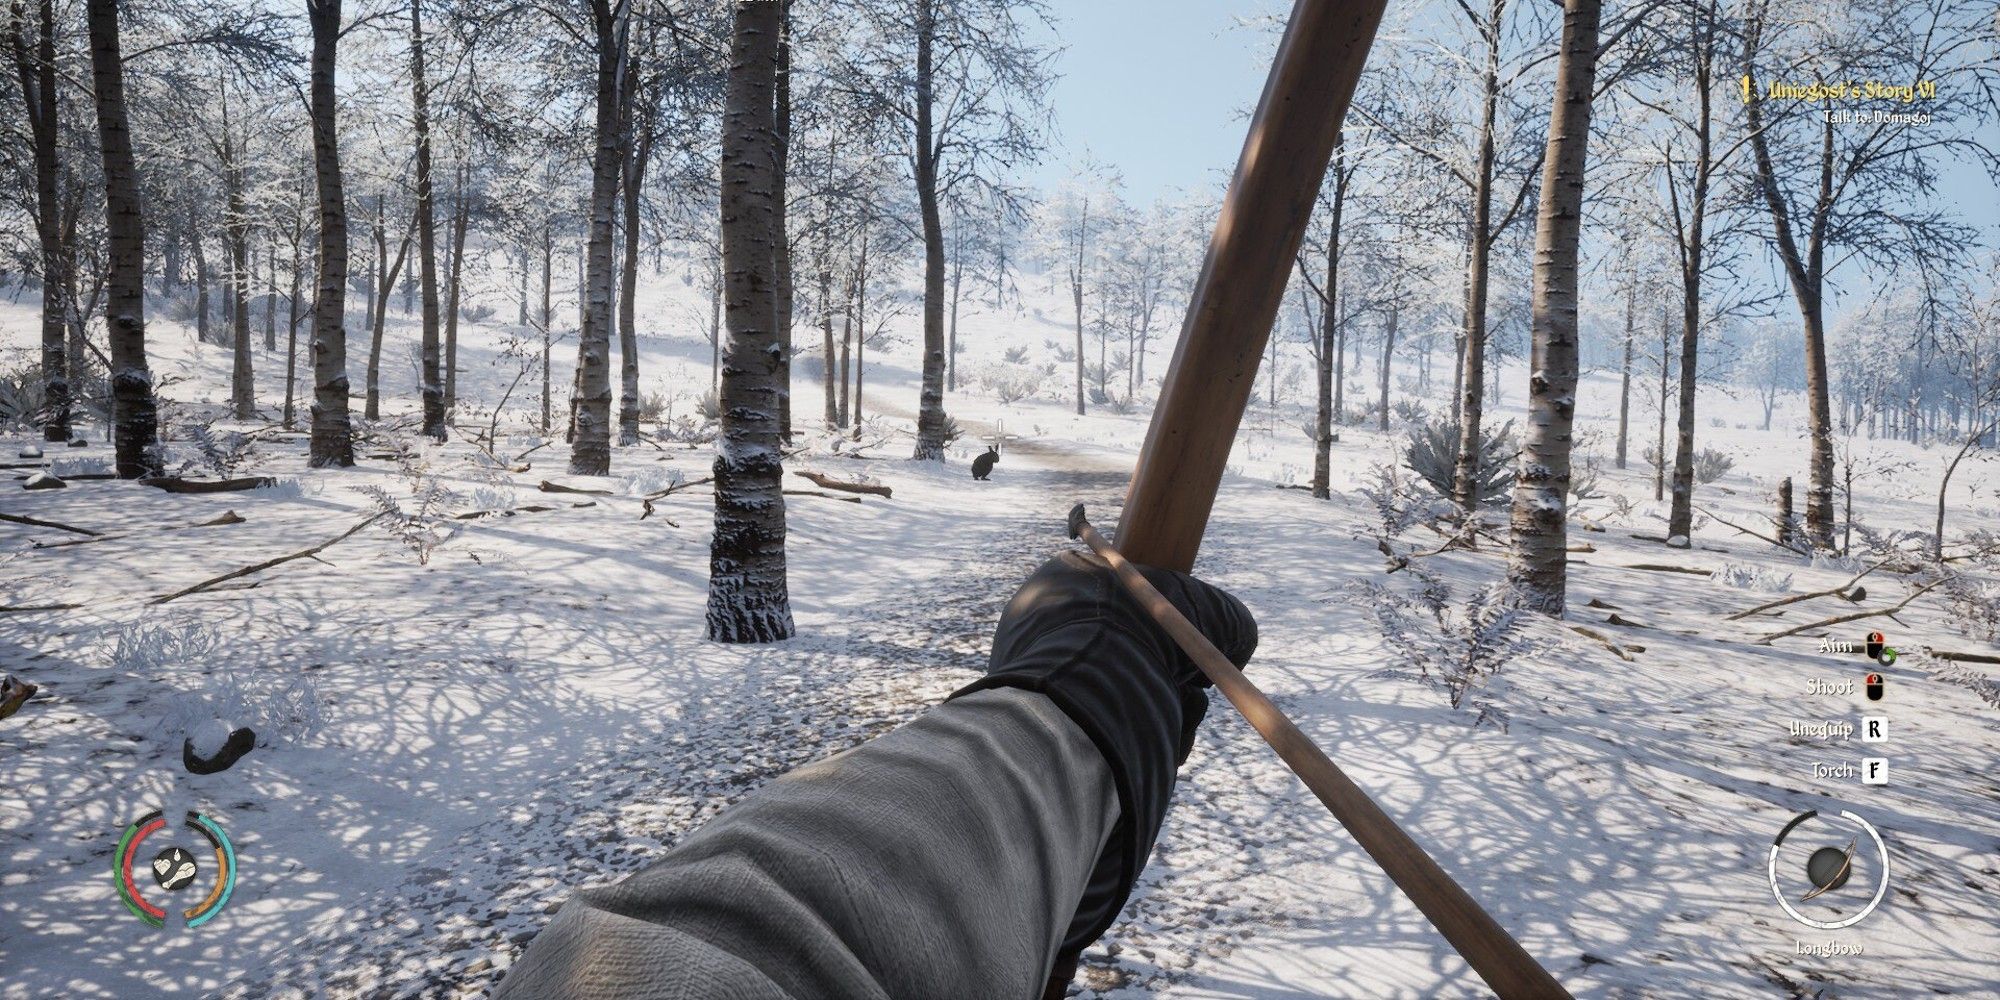 player hunting a rabbit during the winter